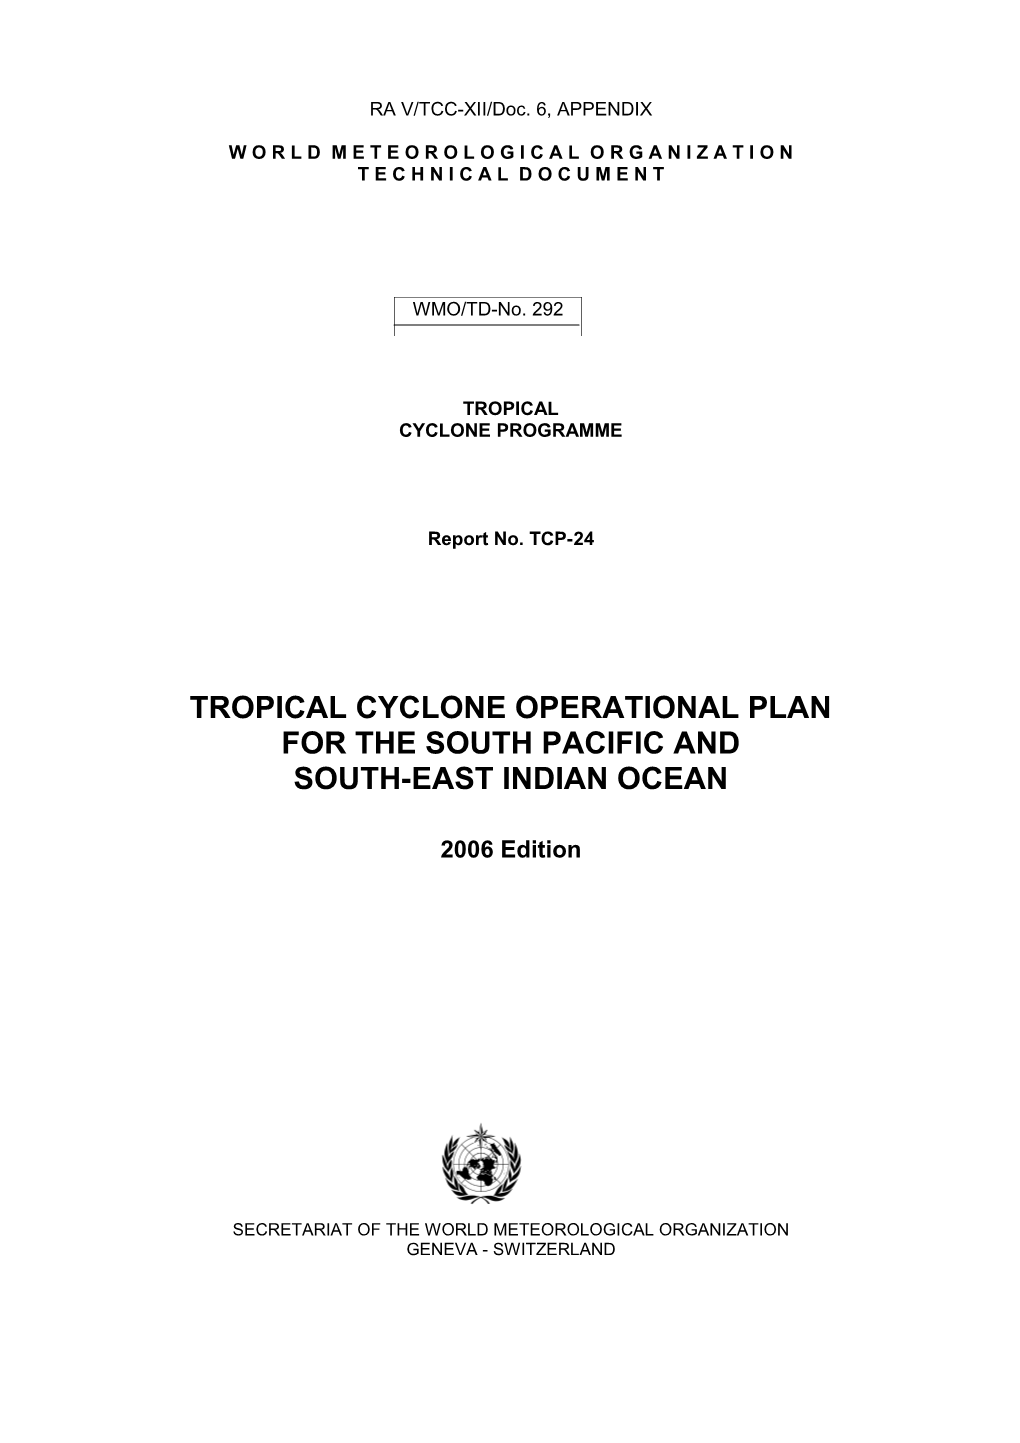 Review of the Tropical Cyclone Operational Plan